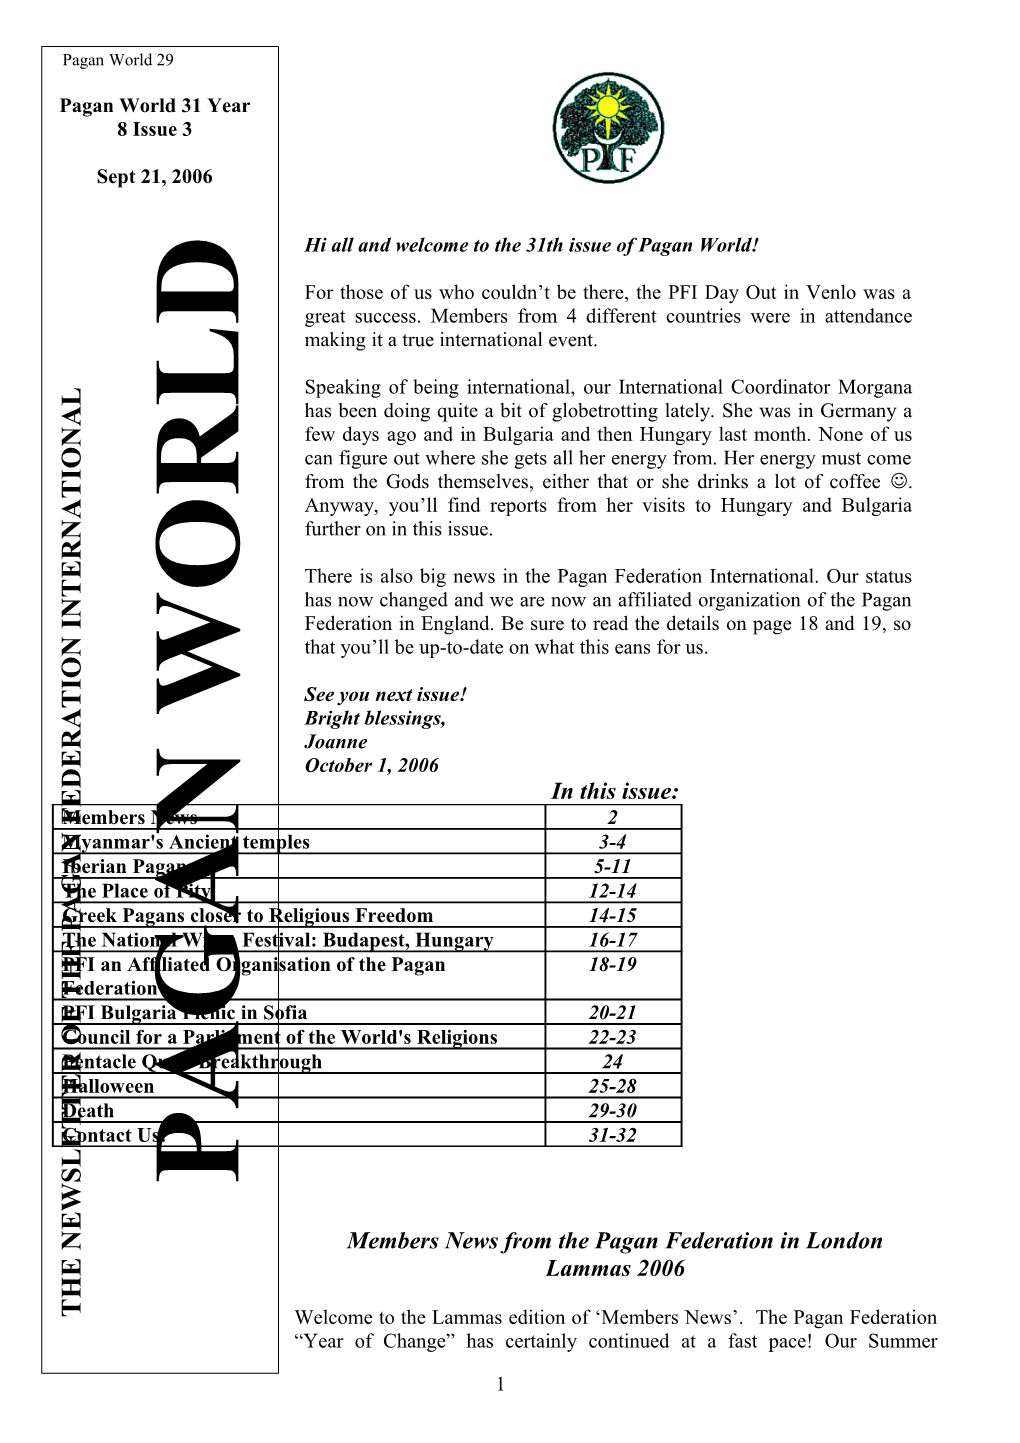 Hi All and Welcome to the 31Th Issue of Pagan World!